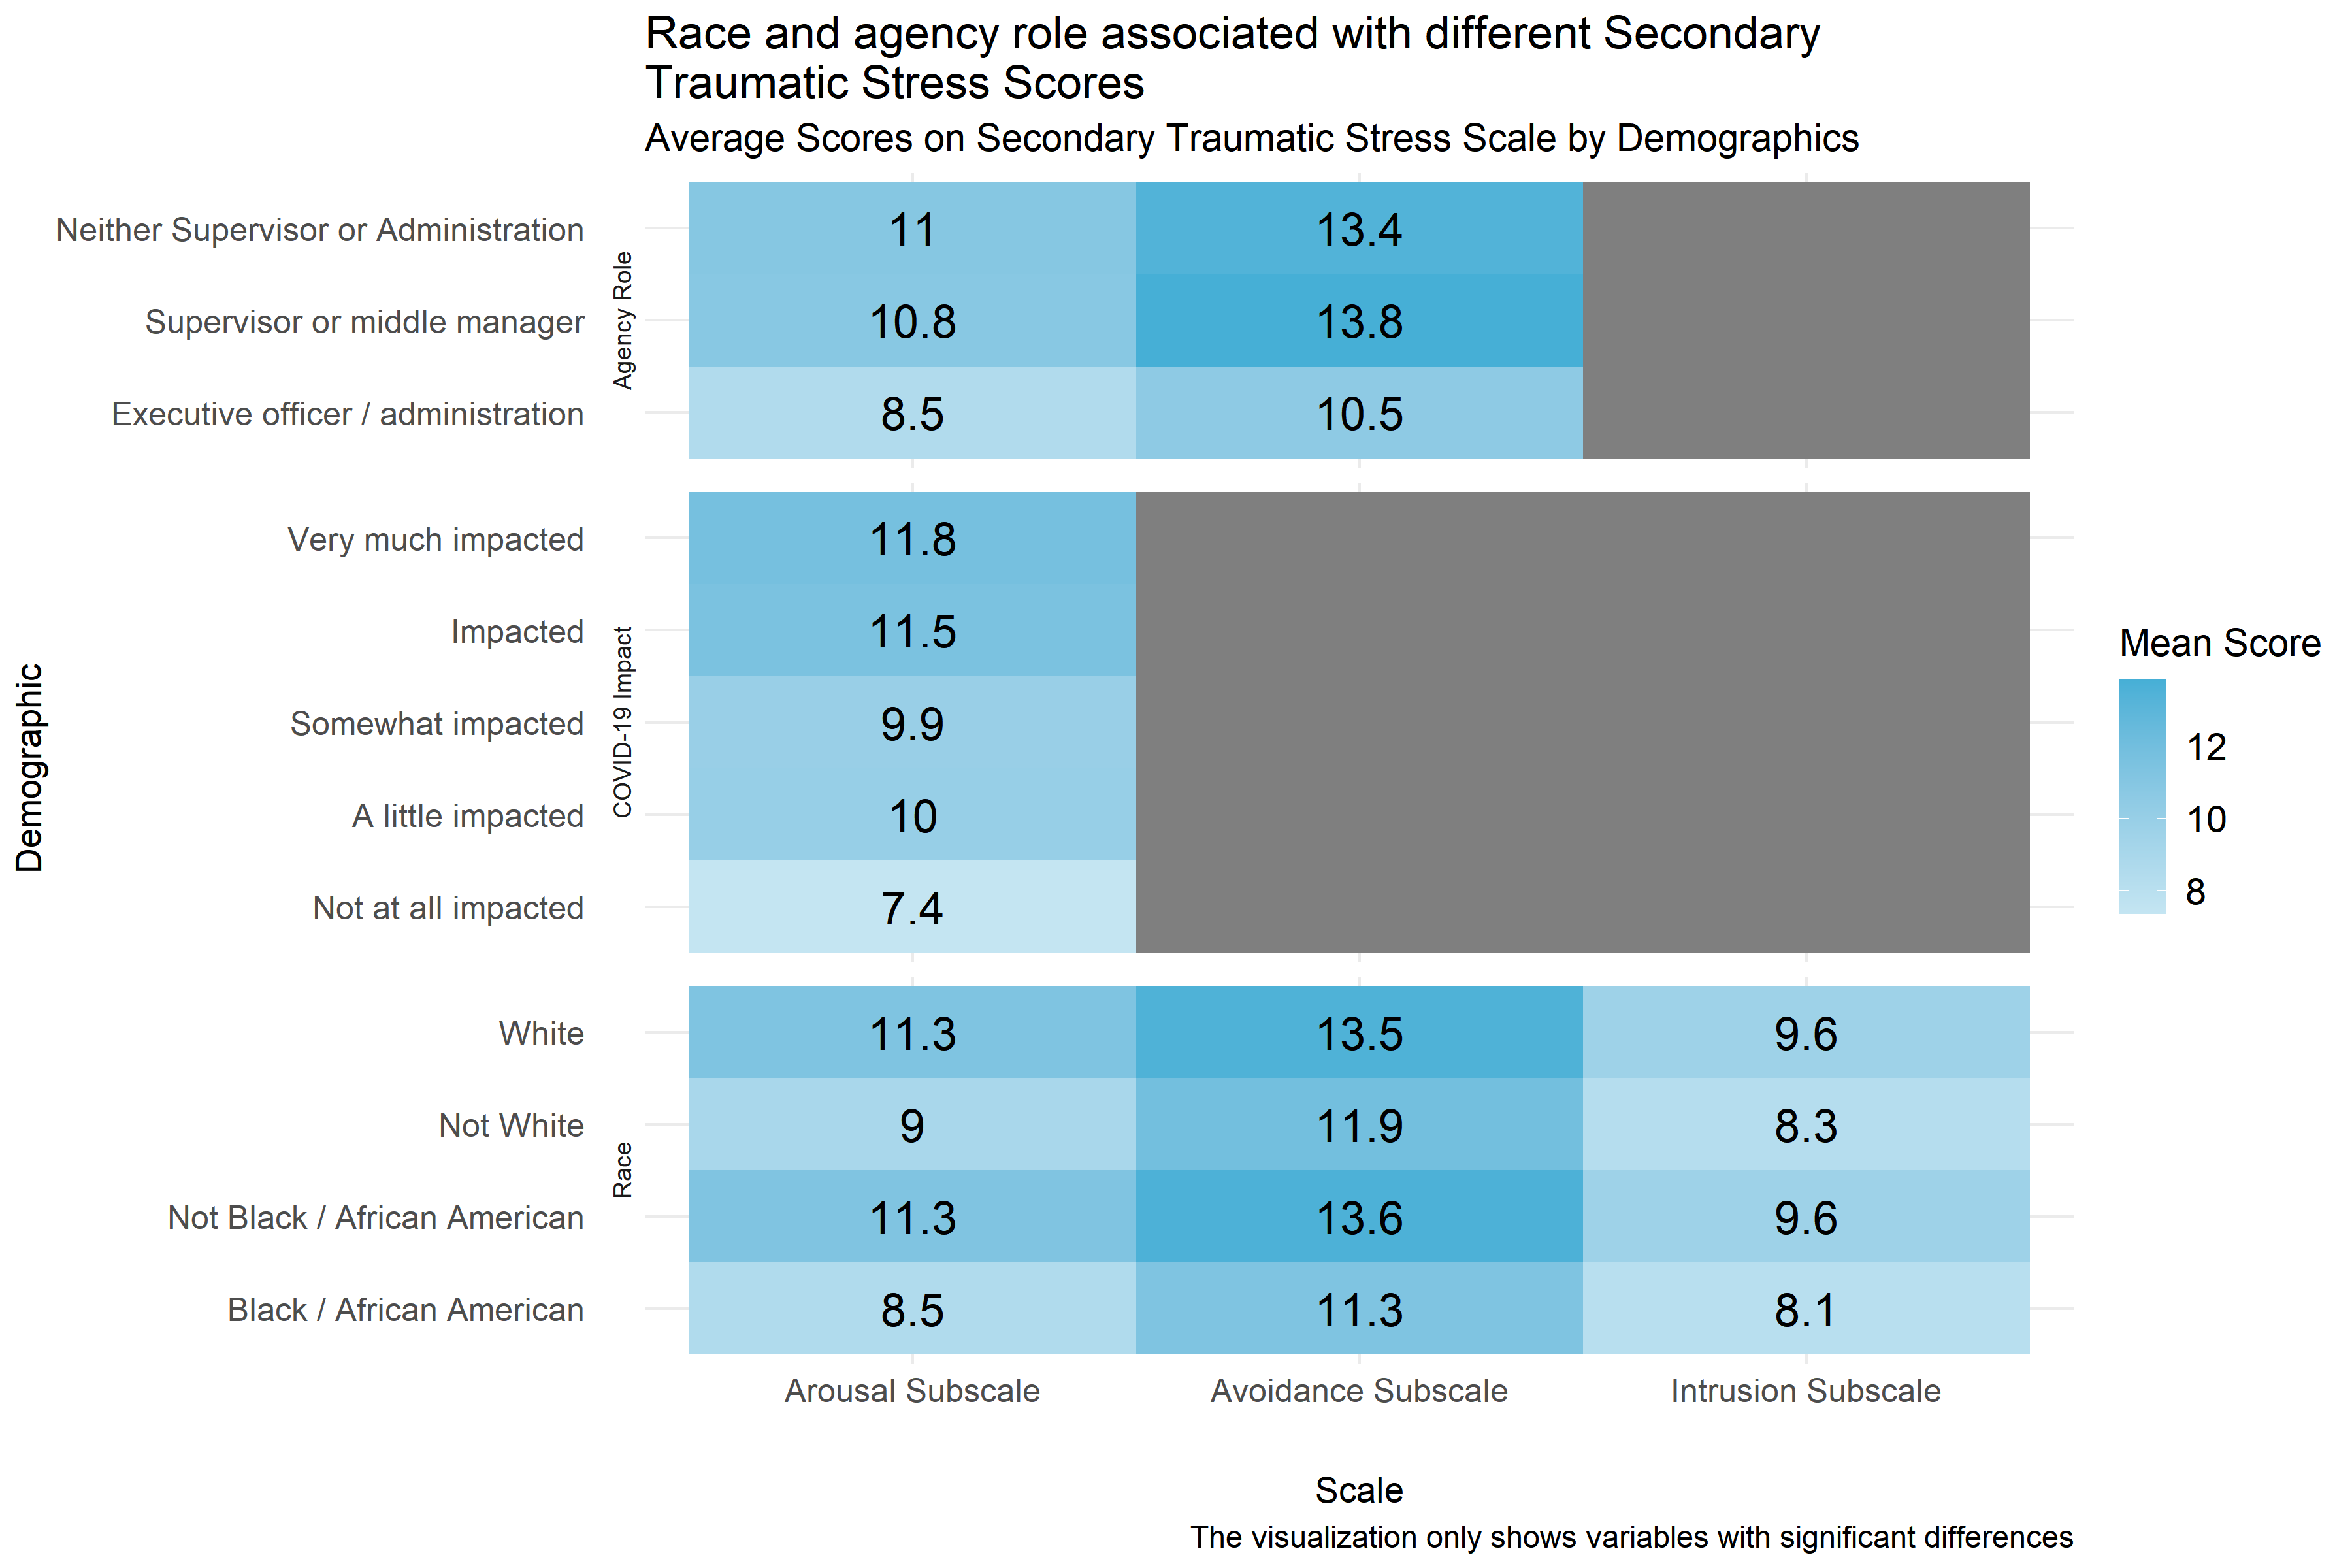 Mean score on Secondary Traumatic Stress Subscales by demographic